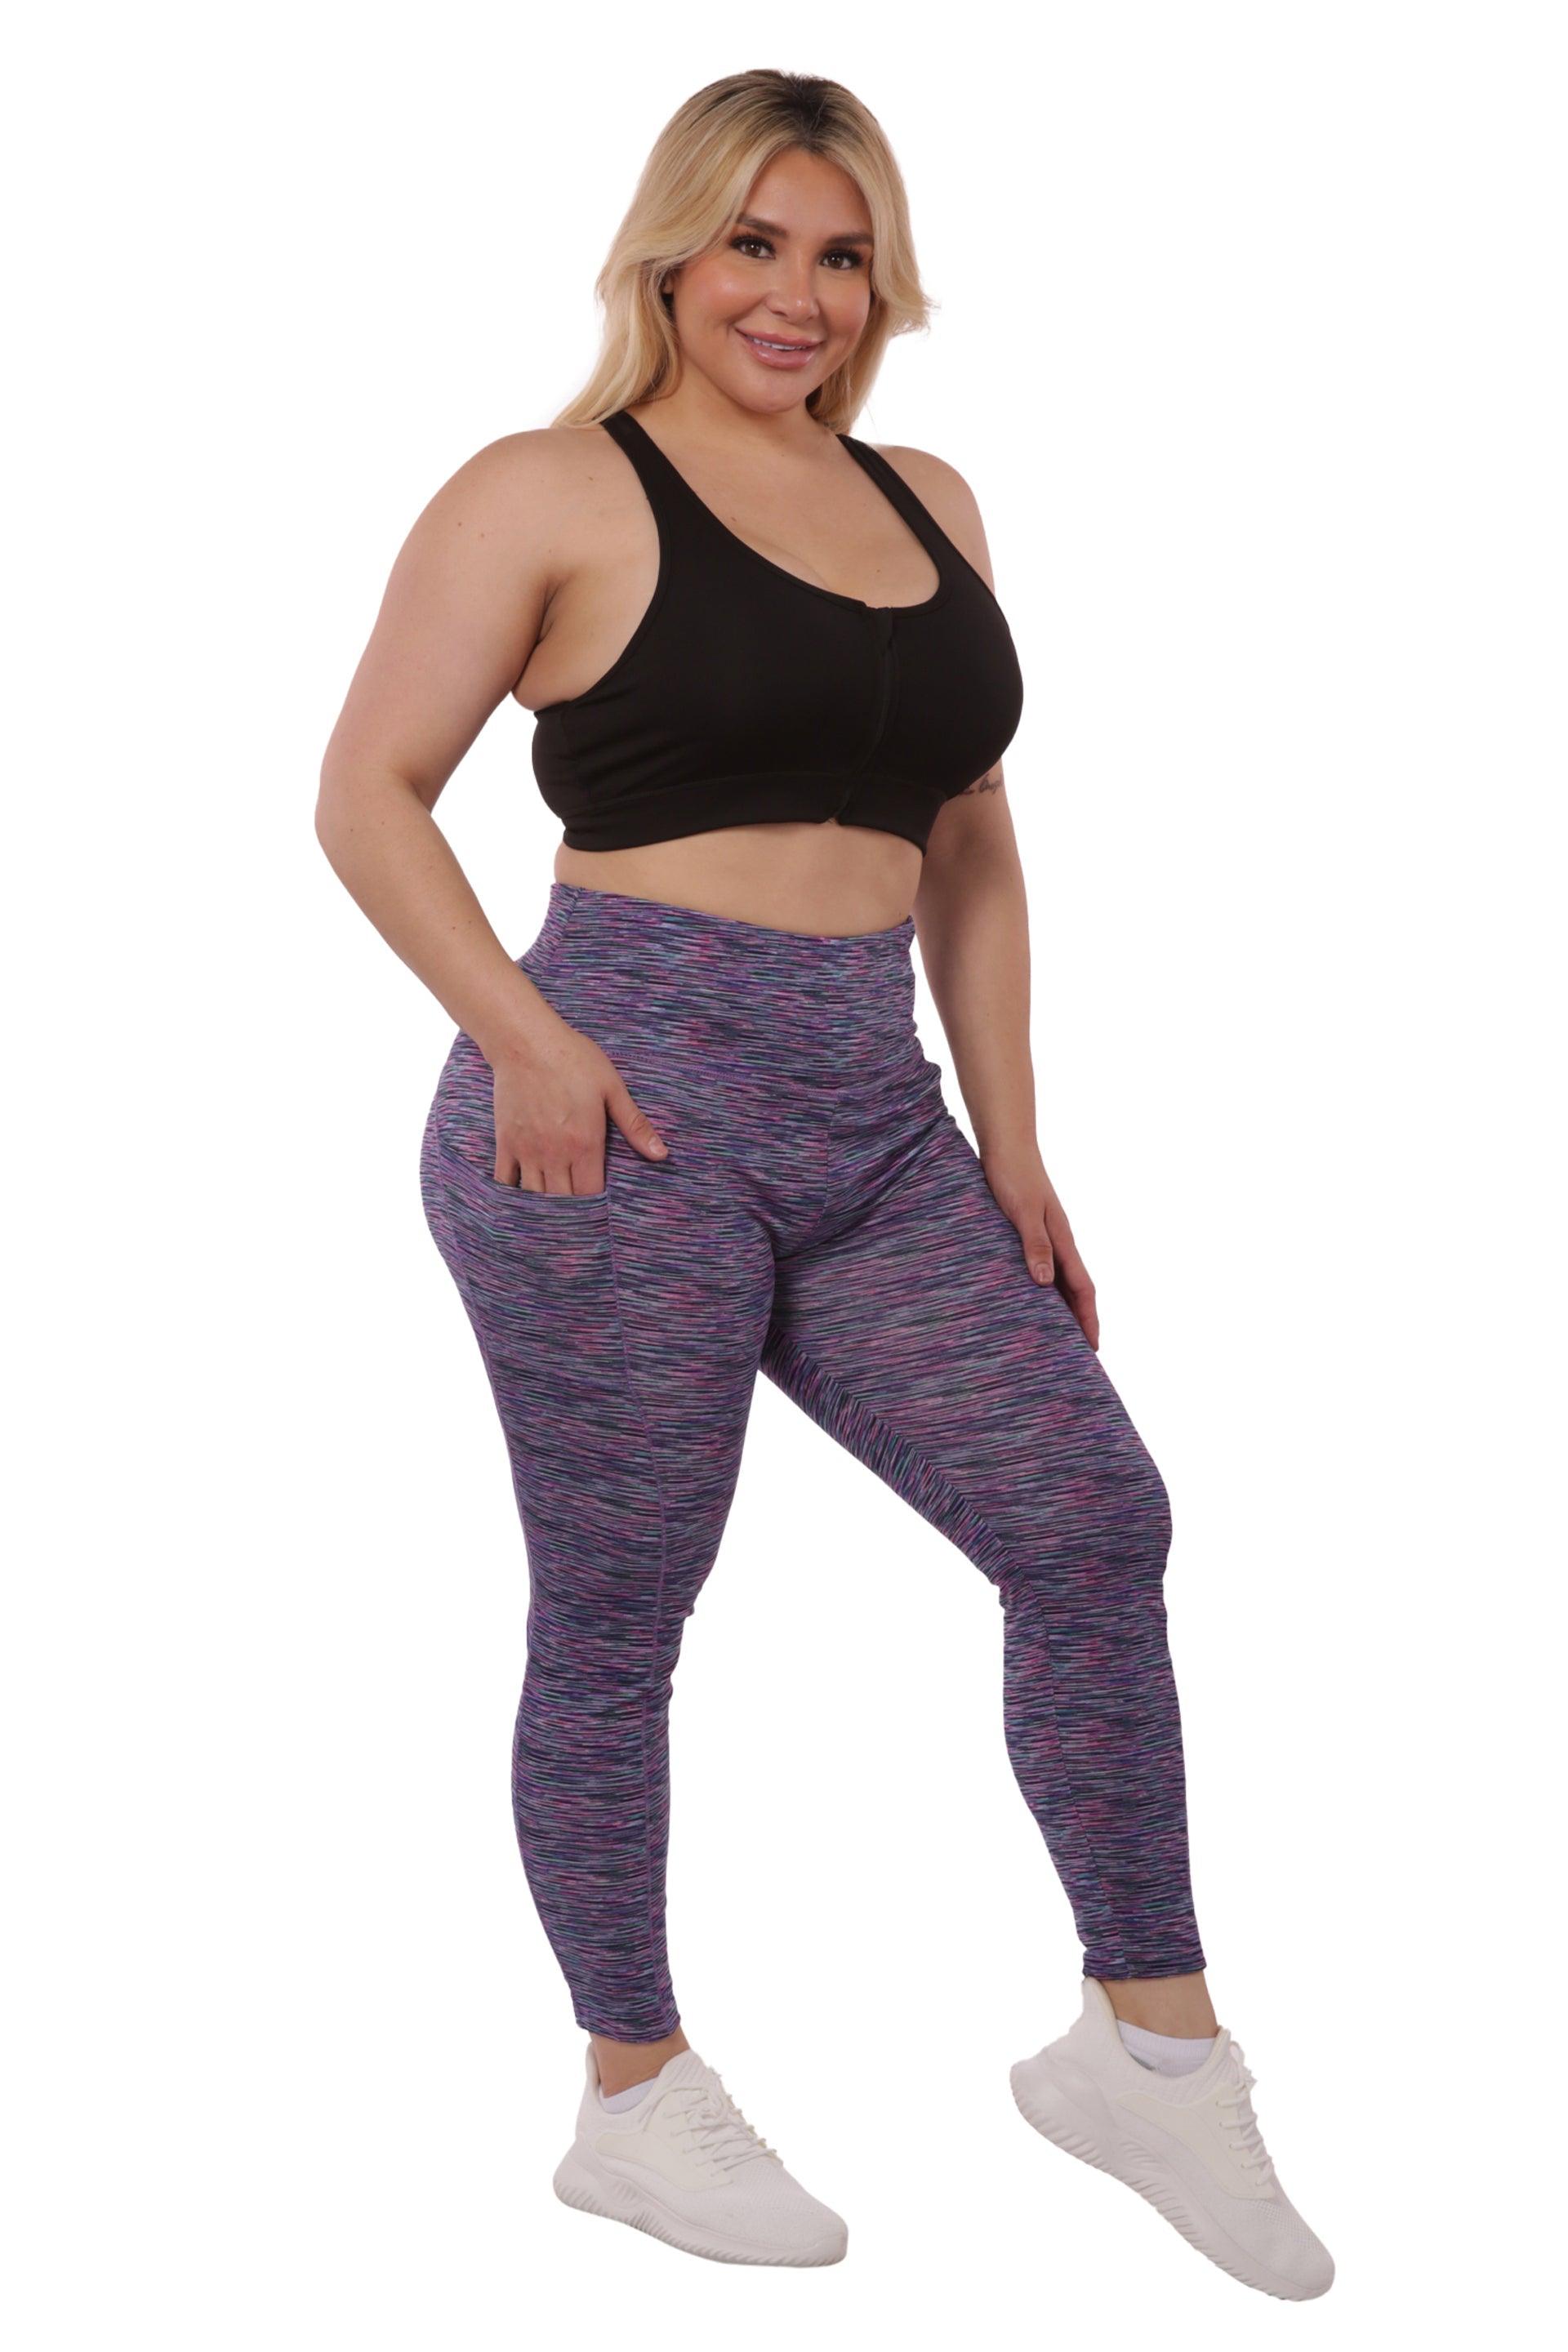 Plus Size High Waist Tummy Control Sports Leggings With Side Pockets -  Pink, Teal Space Dye